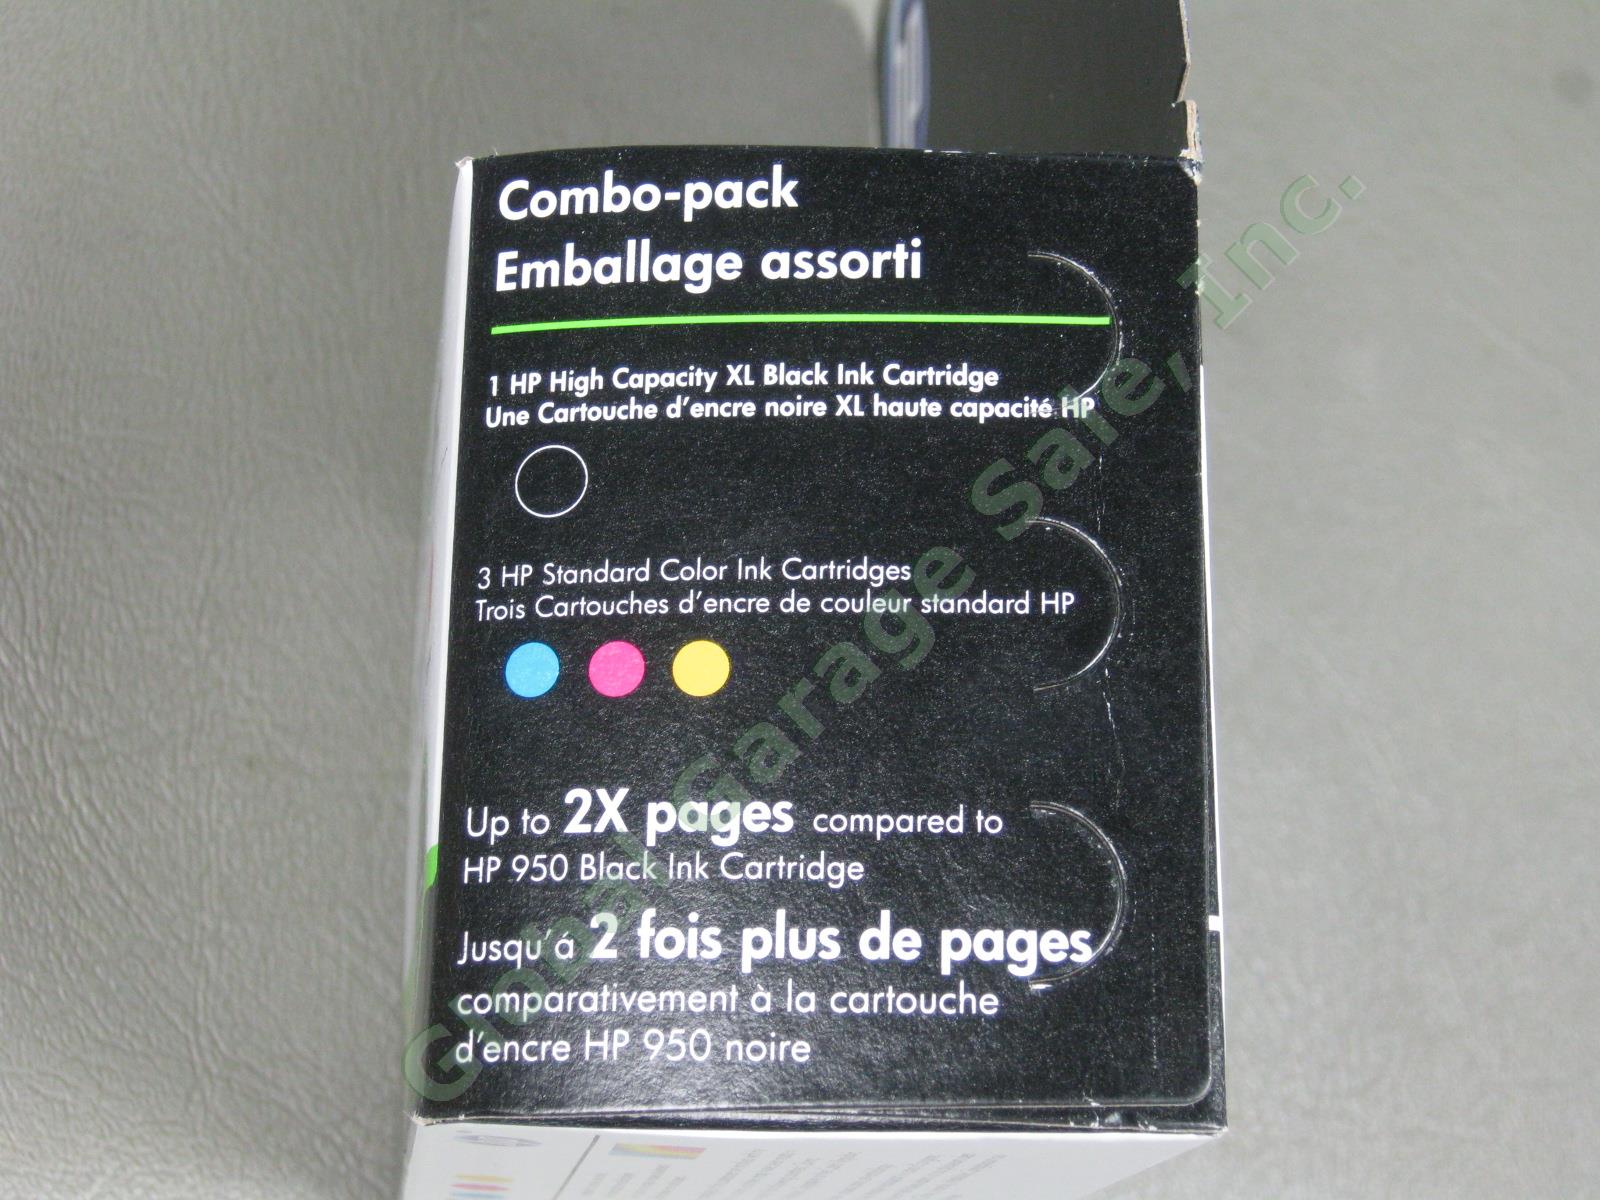 NEW Sealed Genuine HP Officejet 4 Ink Cartridge Combo Pack 950XL Black 951 Color 3